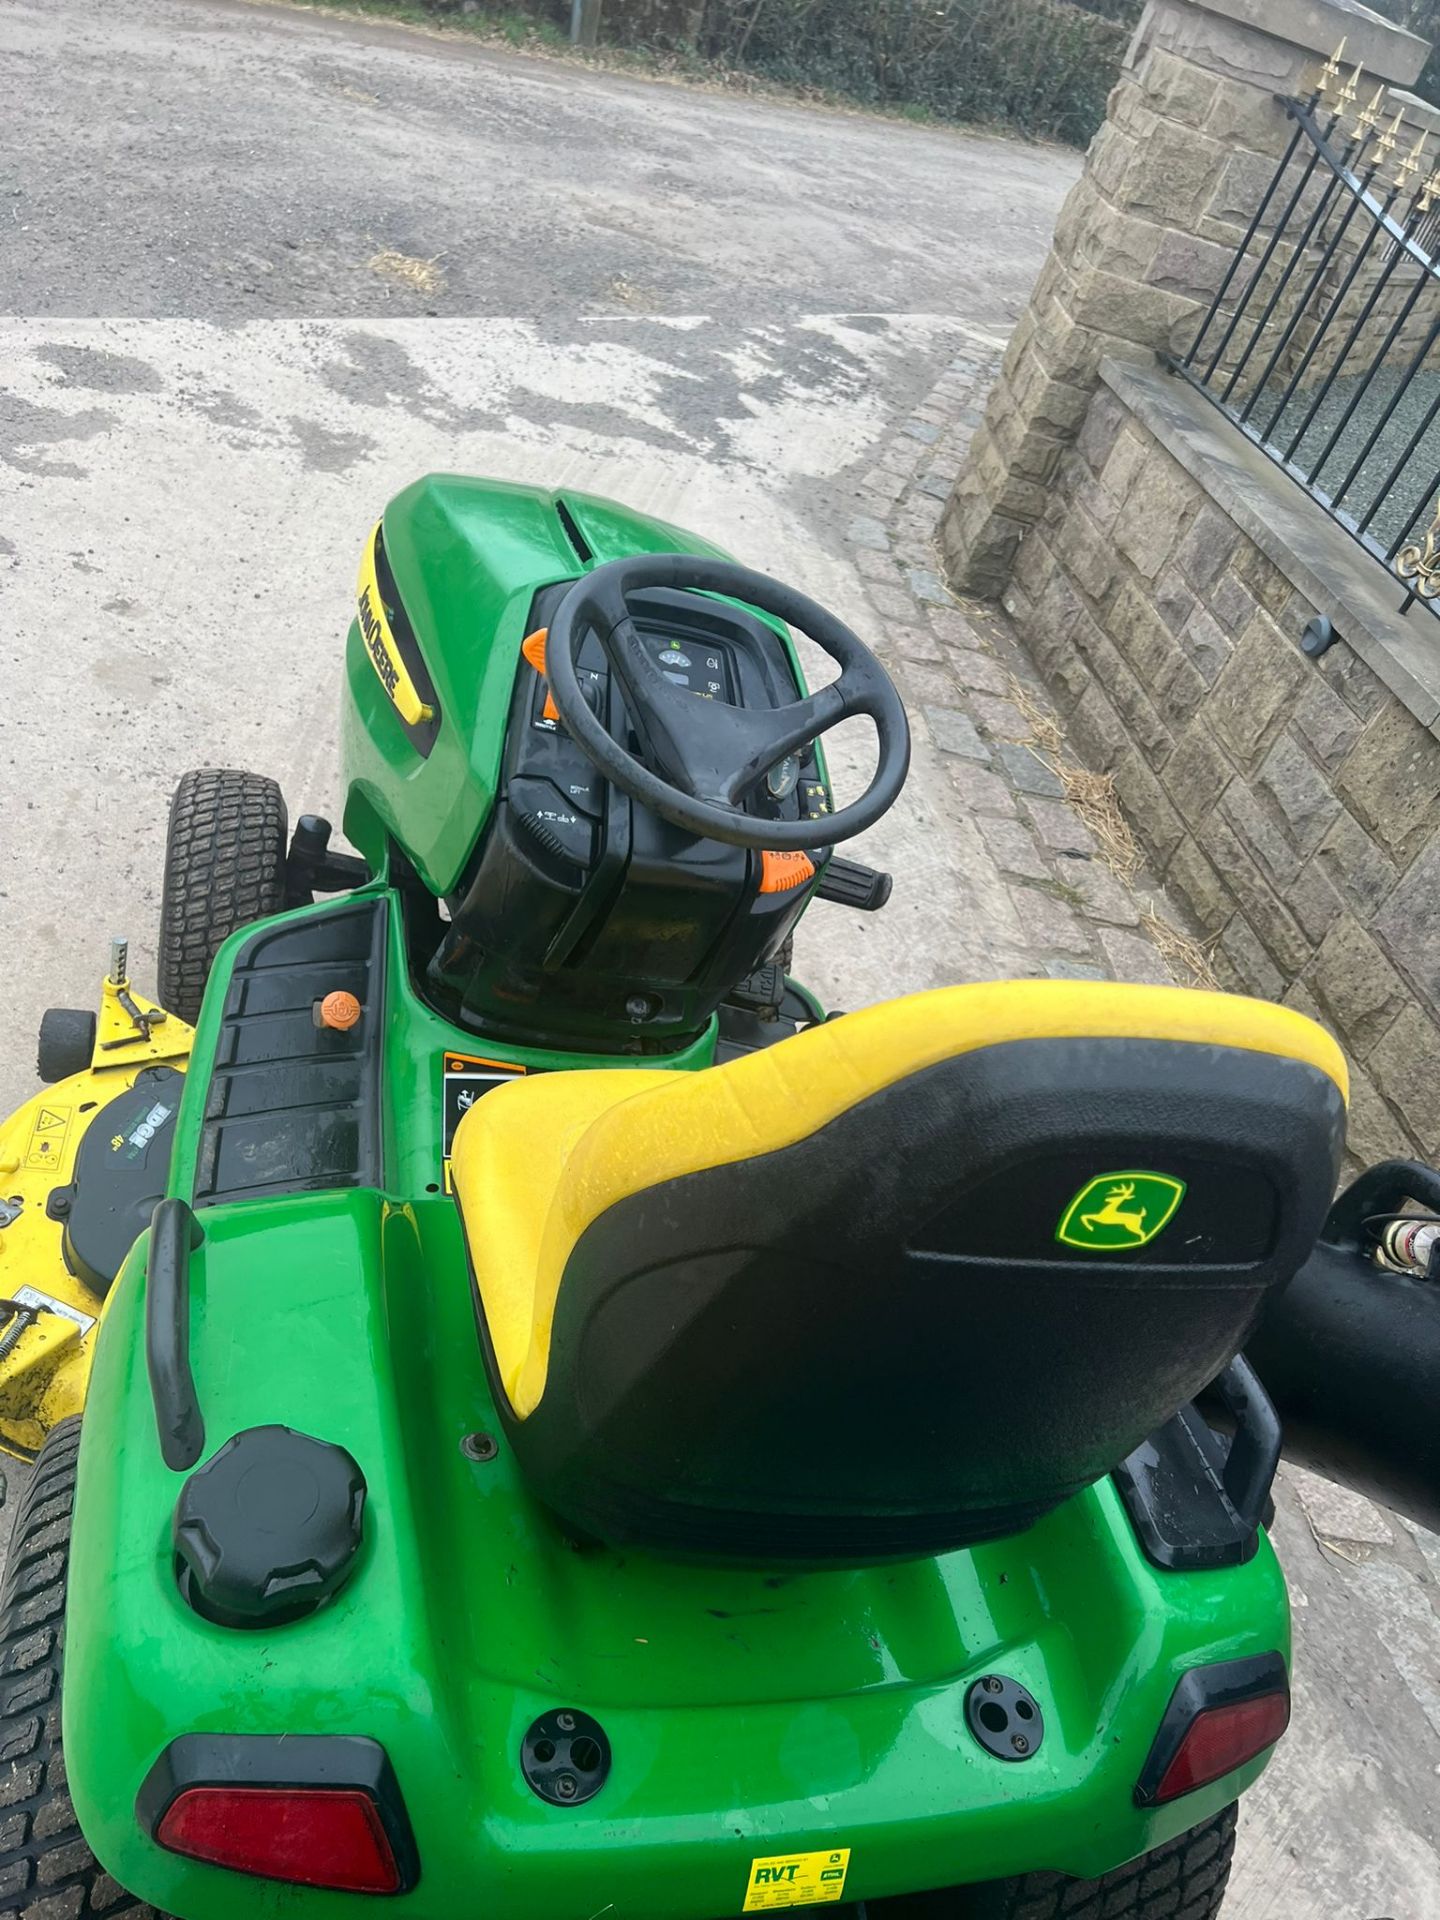 JOHN DEERE X540 RIDE ON LAWN MOWER, HYDRAULIC UP AND DOWN DECK, YEAR 2012 *PLUS VAT* - Image 9 of 9